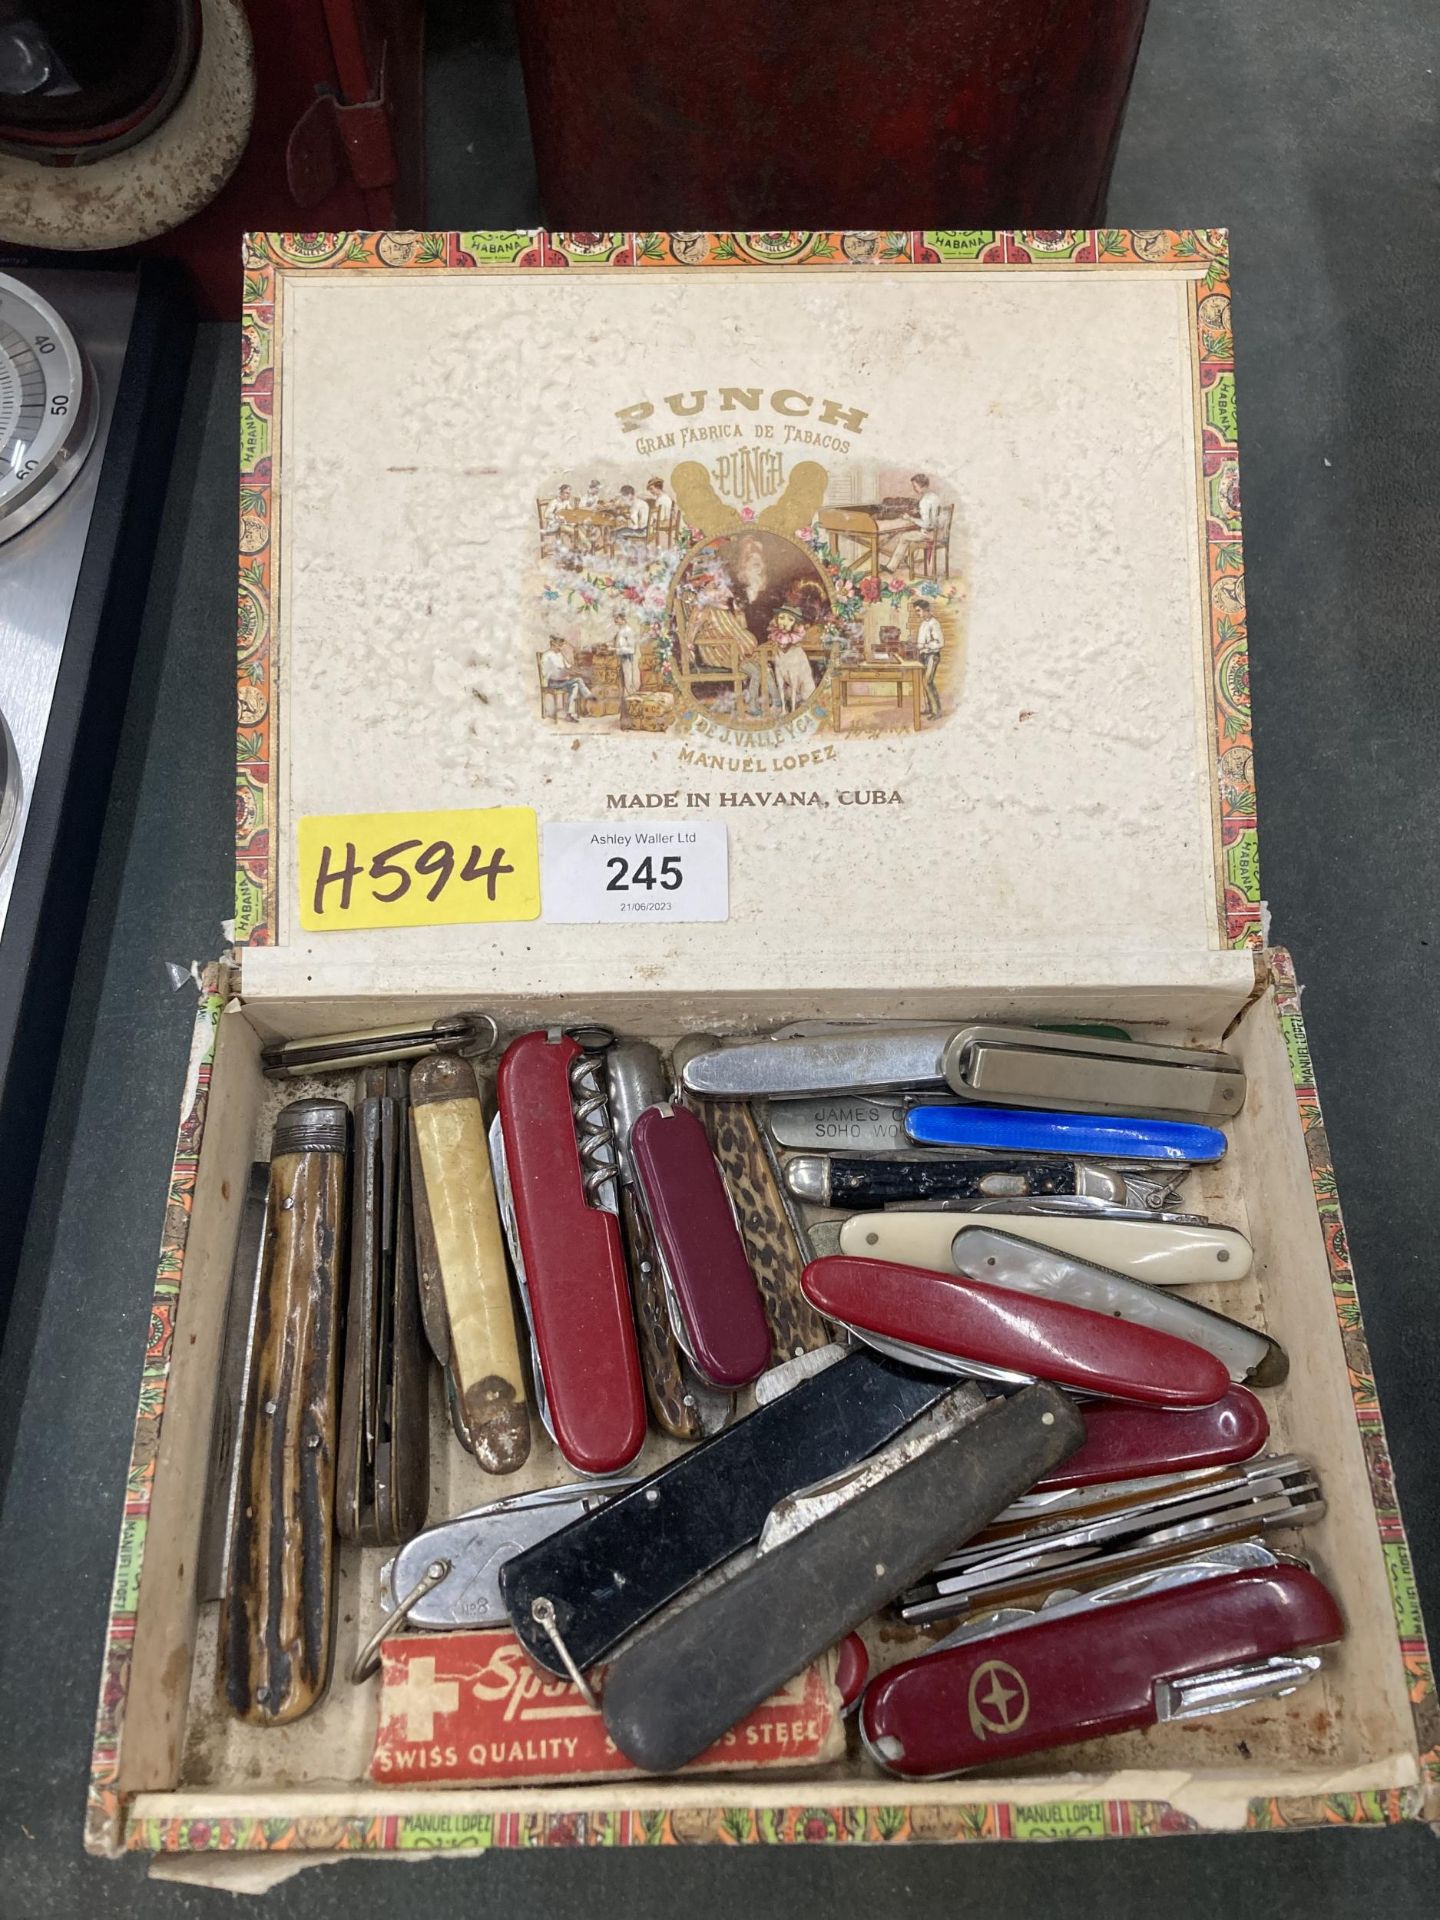 A BOX OF VINTAGE SWISS ARMY KNIVES